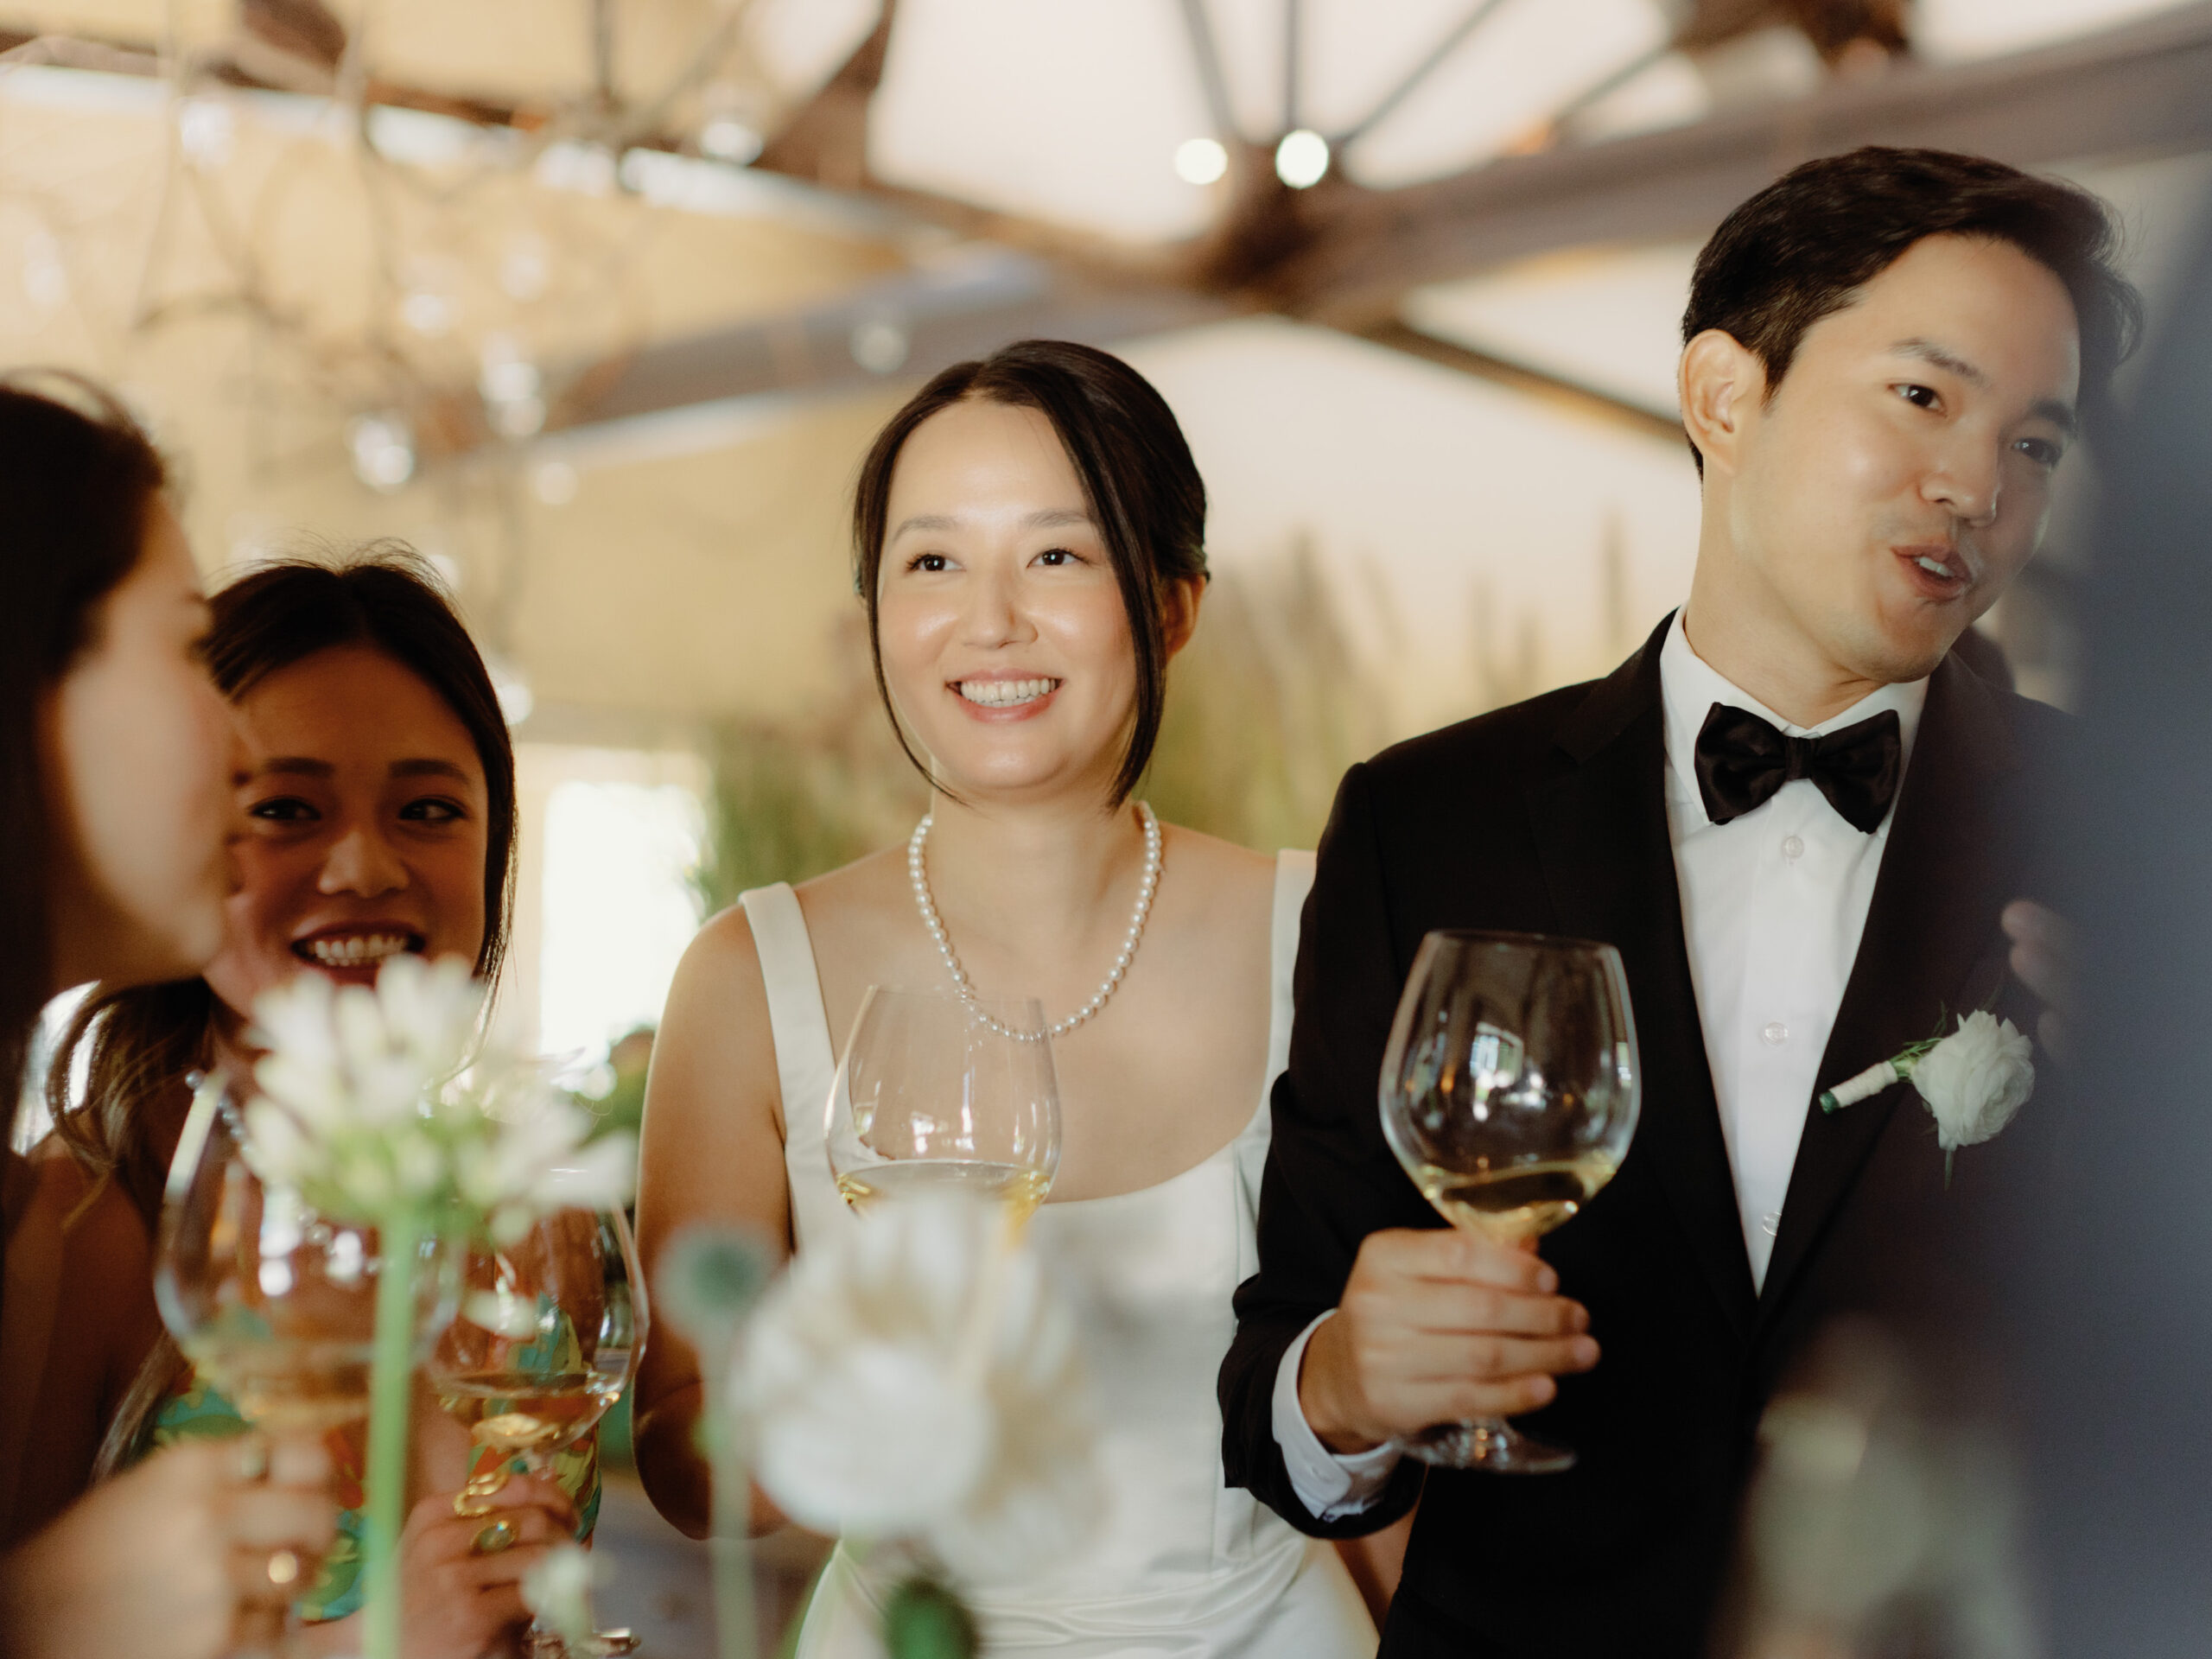 The newlyweds are chatting with guests in their wedding reception while drinking champagnes, candidly captured by Jenny Fu Studio.